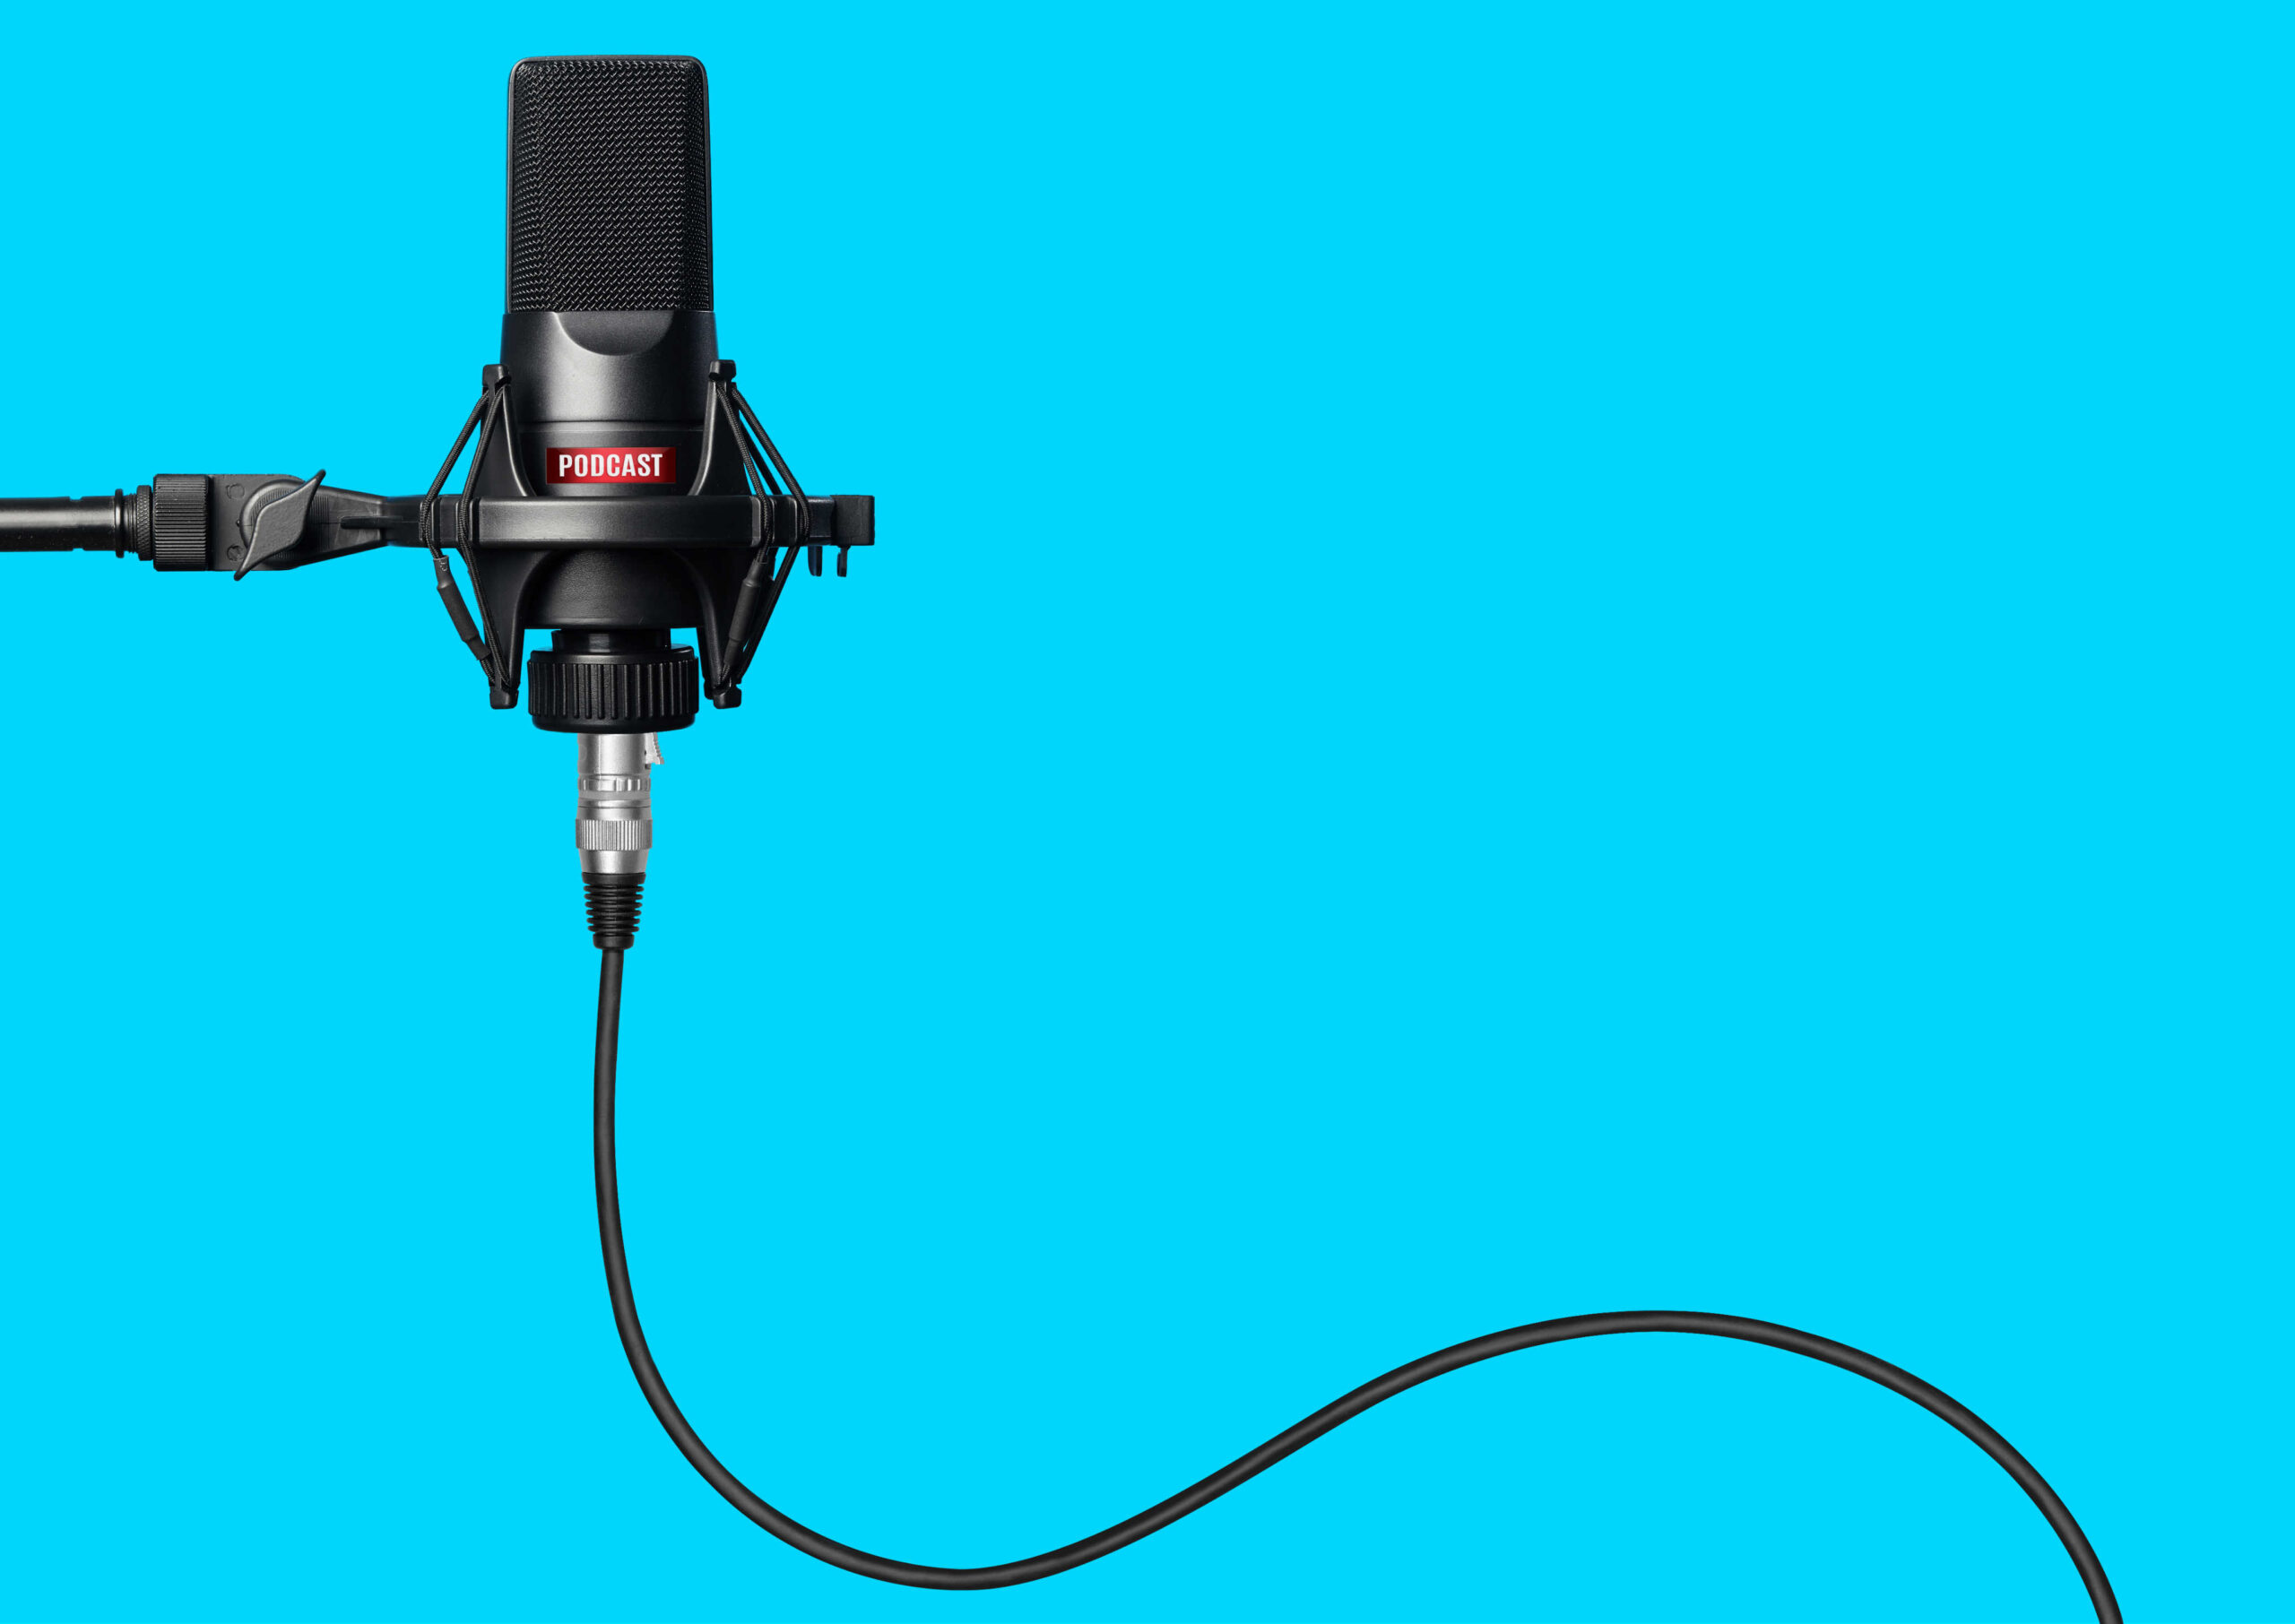 Podcast mic and blue background IBLP